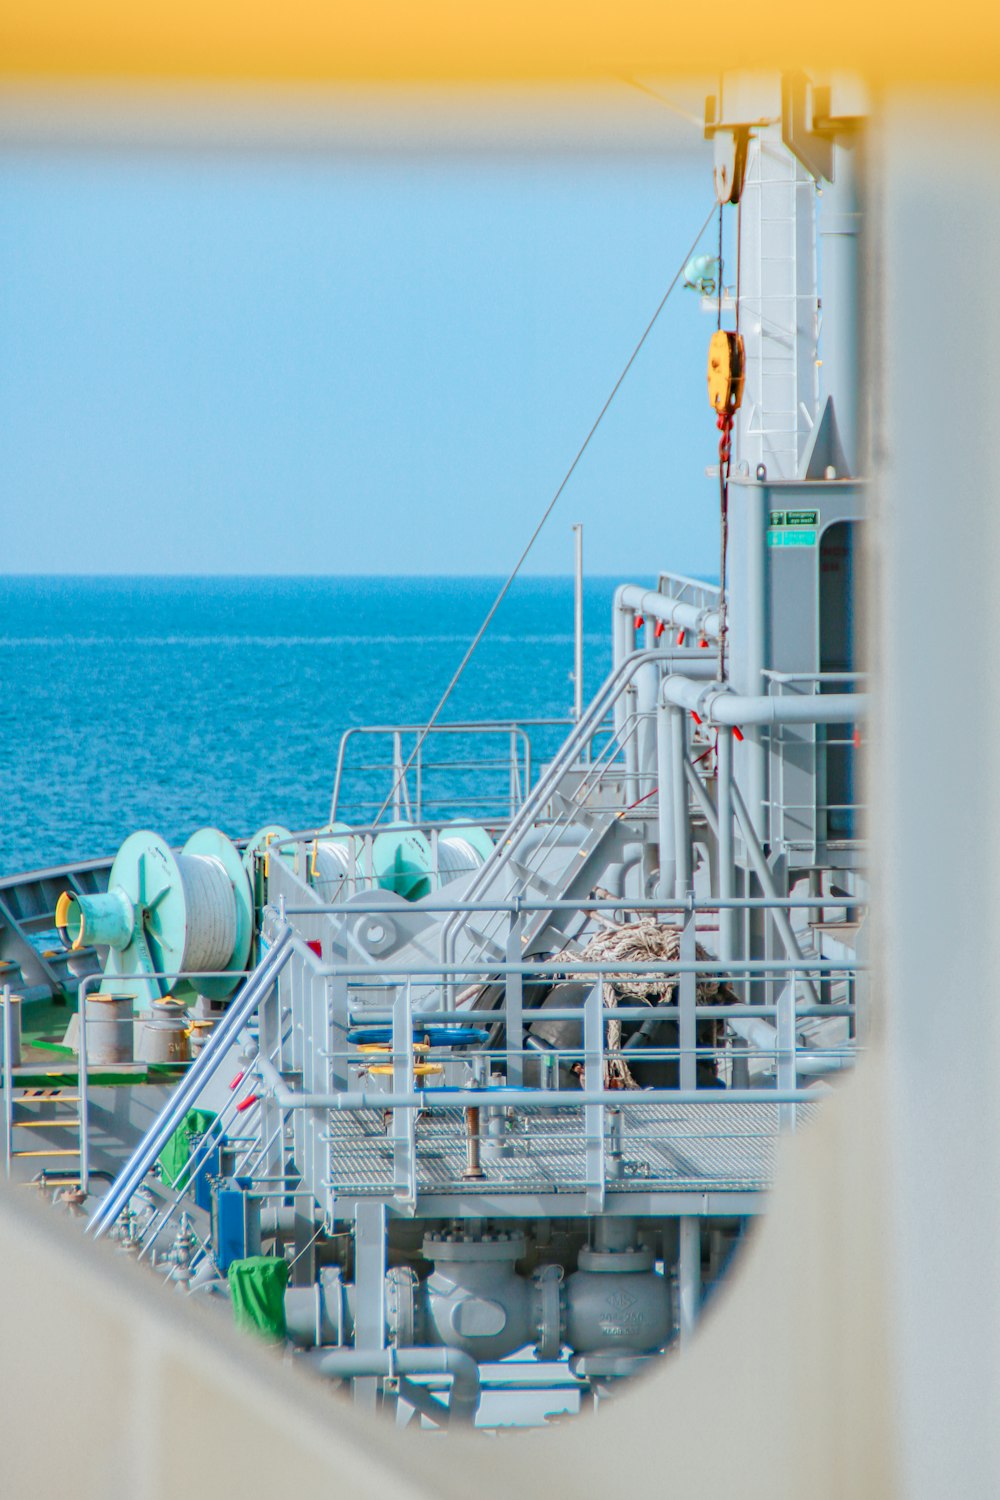 a view of the ocean from a ship